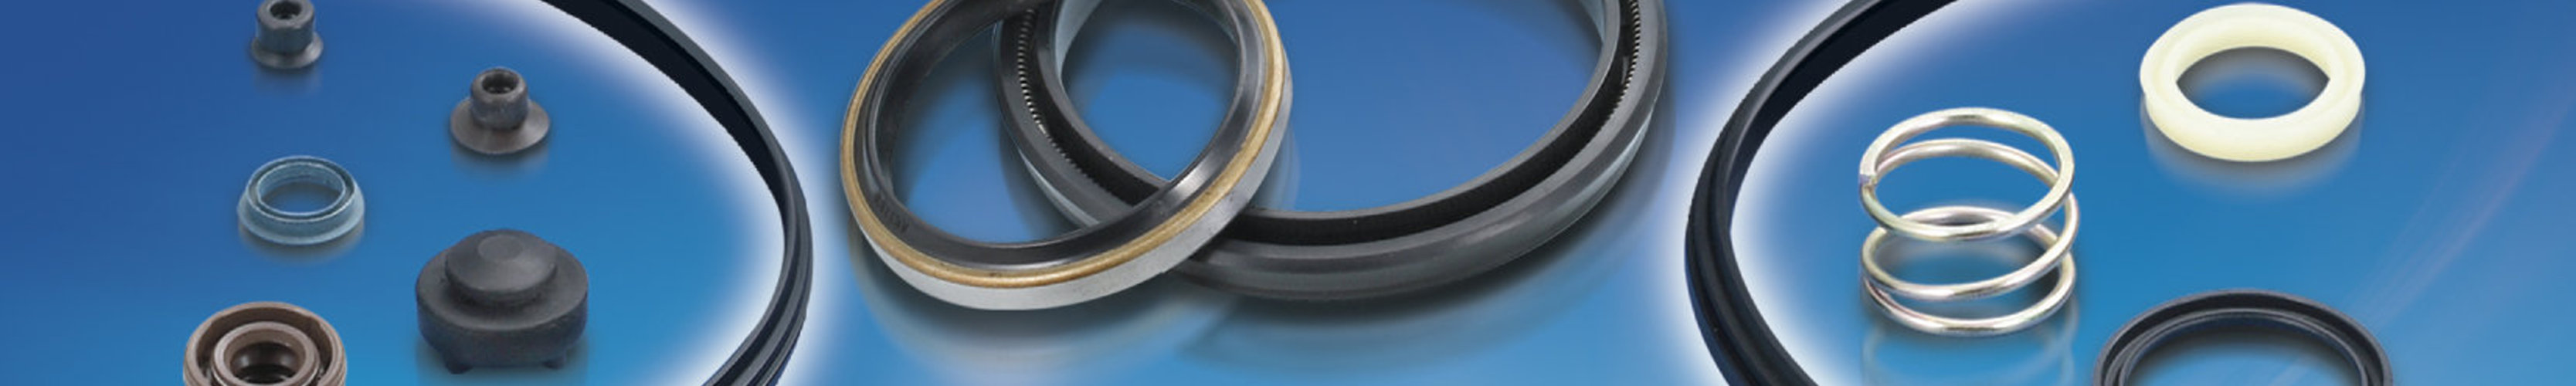 Oil Seals, O-rings, Packings, Rubber Parts, Oil Seals, O-rings, Packings, Rubber Parts,Oil Seals, O-rings, Packings, Rubber Parts,Oil Seals, O-rings, Packings, Rubber Parts